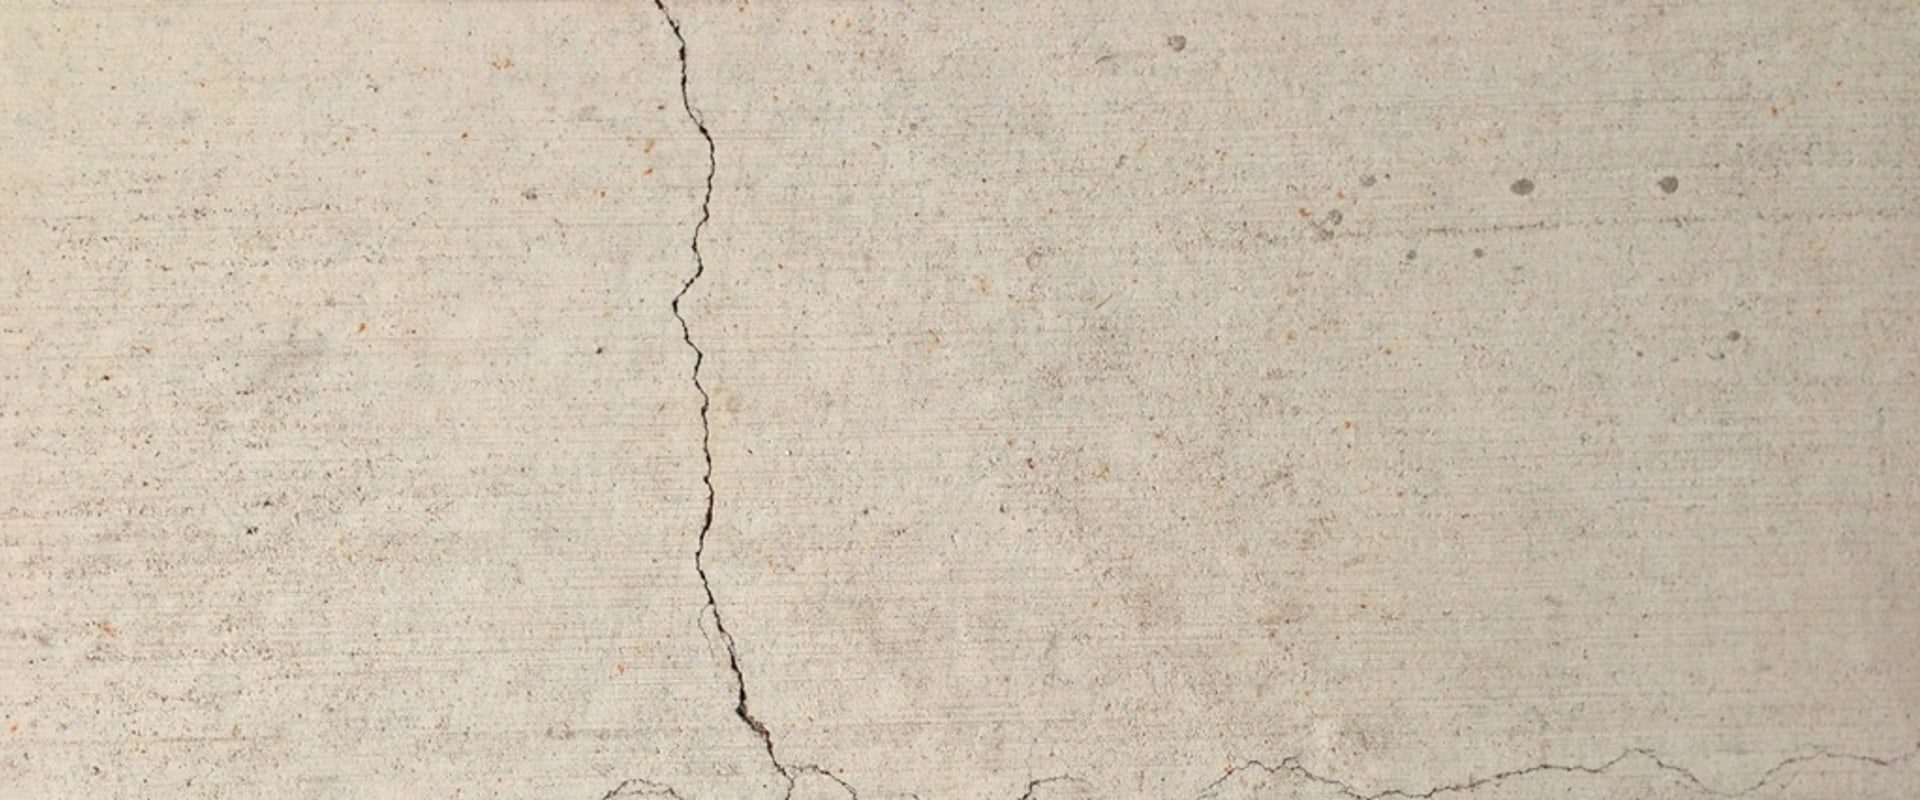 Should I be worried about cracks in concrete?